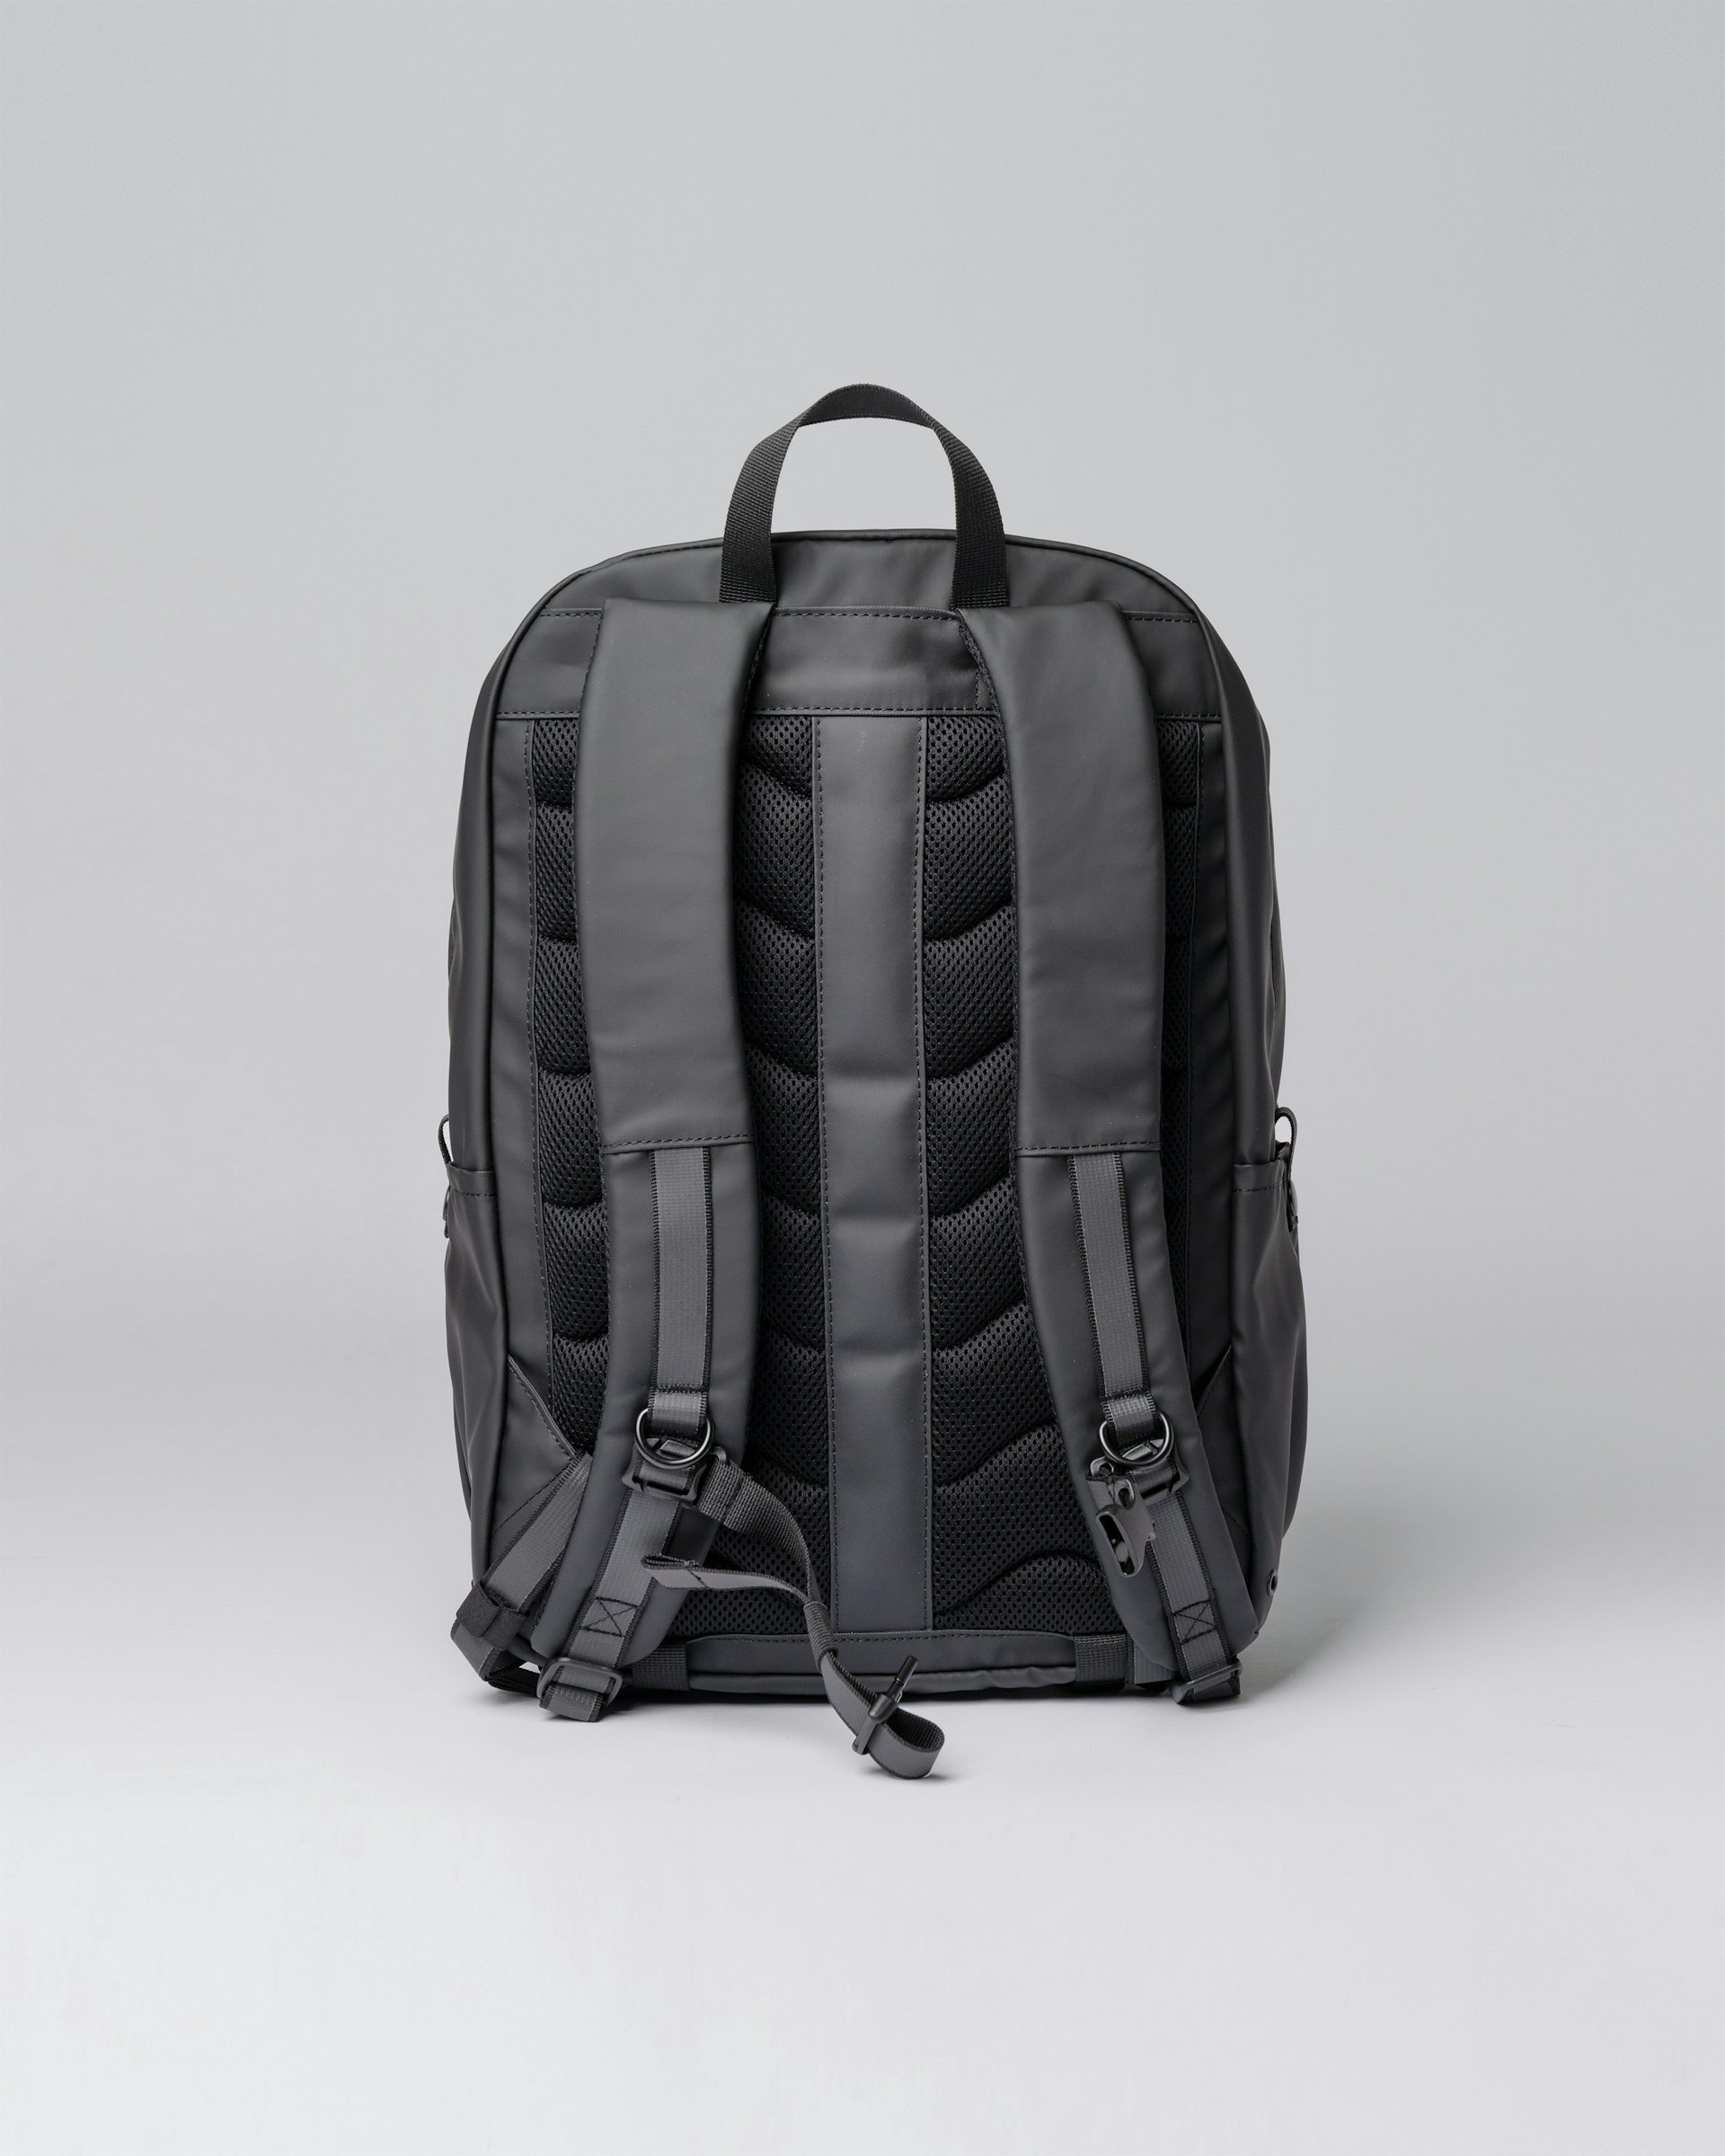 Alvar belongs to the category Backpacks and is in color black (3 of 6)